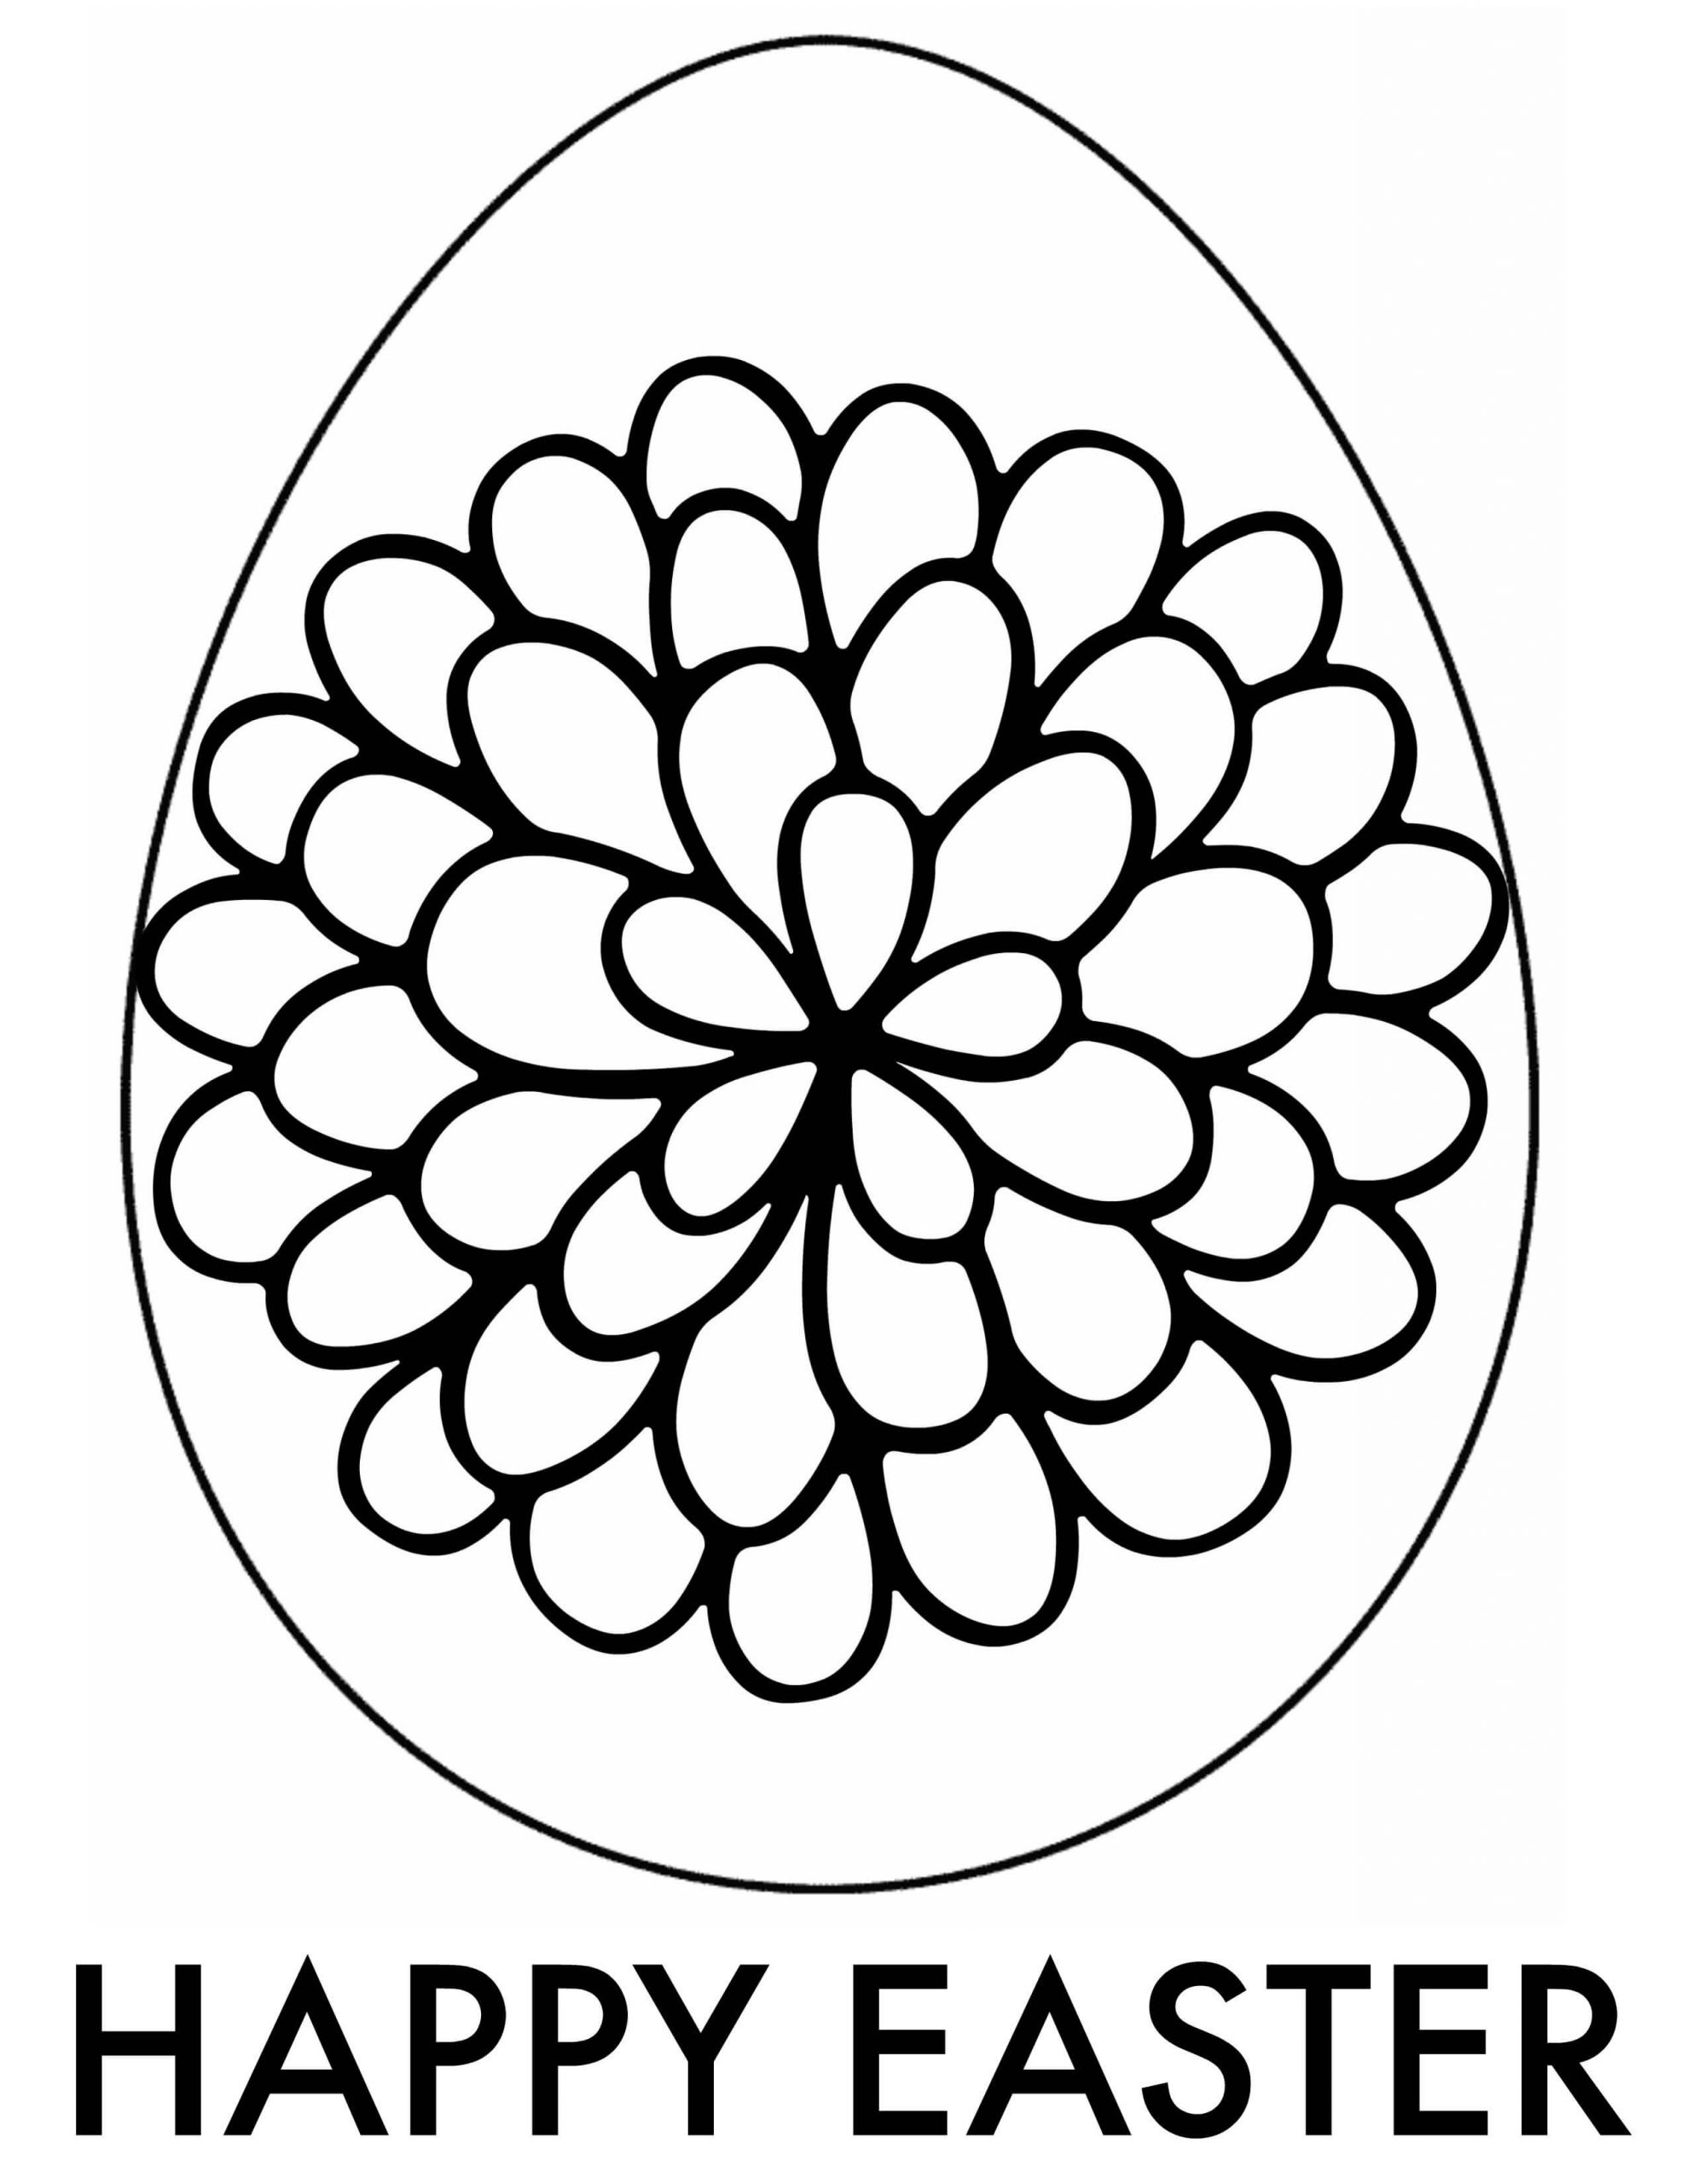 Printable Easter Egg Coloring Pages
 Easter Adult Coloring Pages